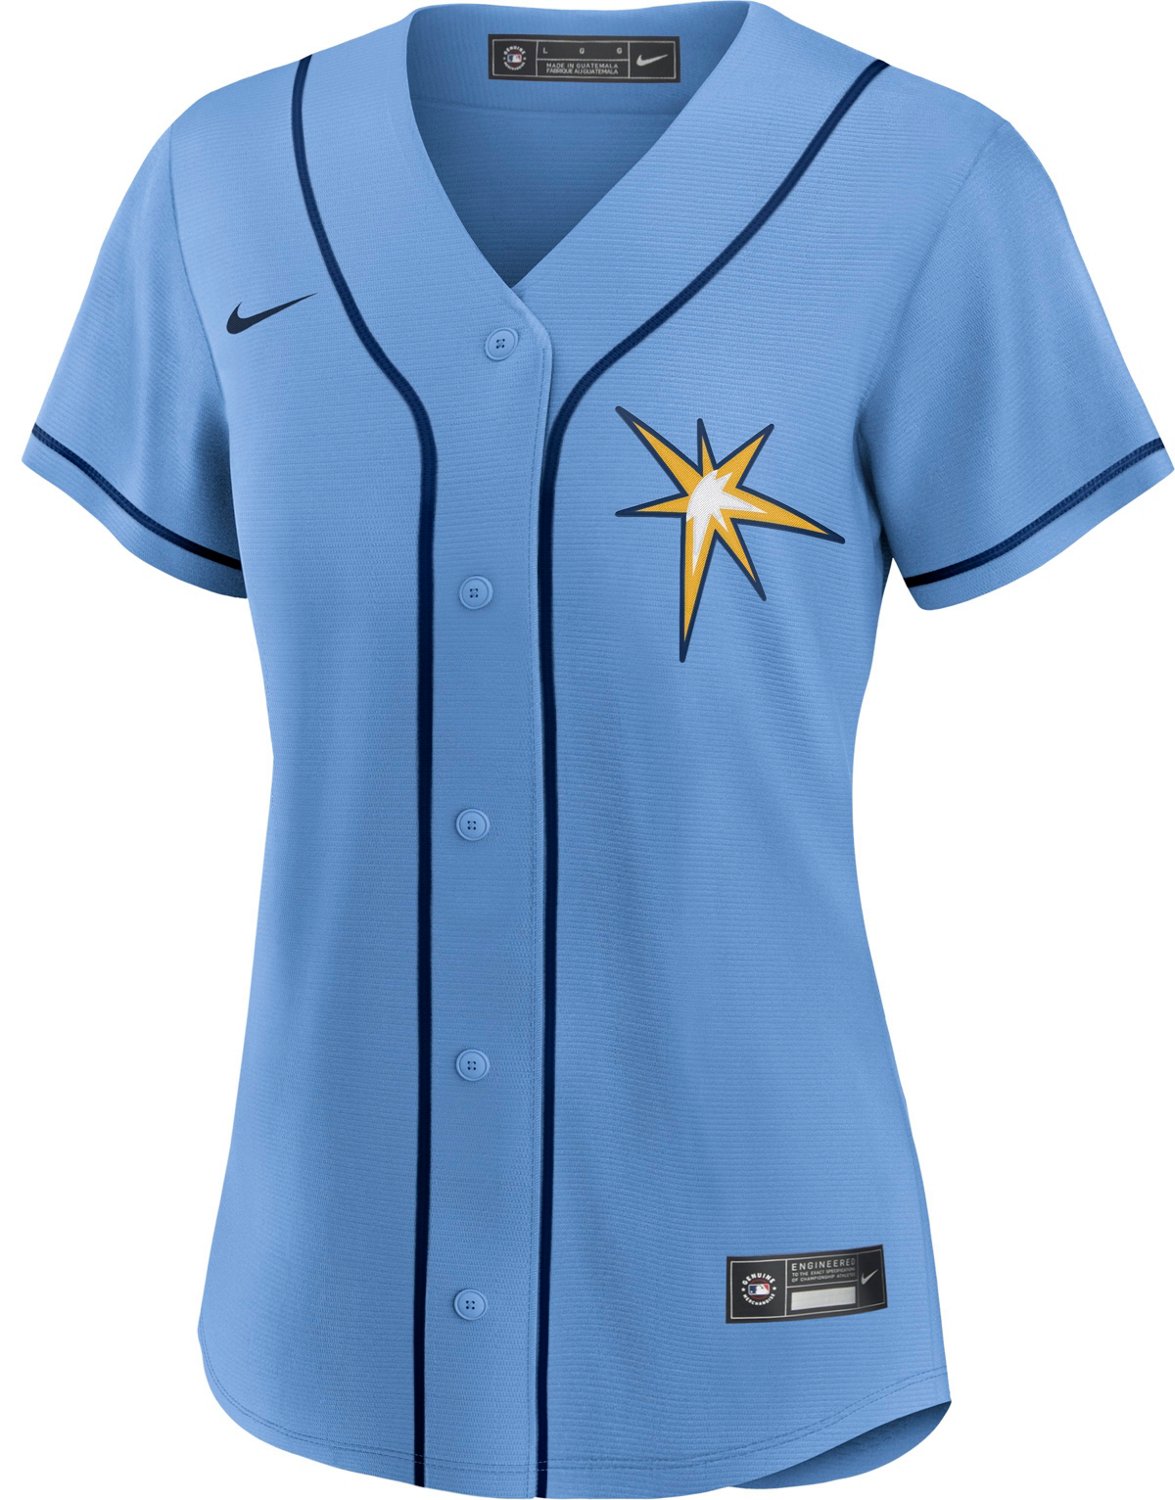 Official Tampa Bay Rays Gear, Rays Jerseys, Store, Rays Gifts, Apparel